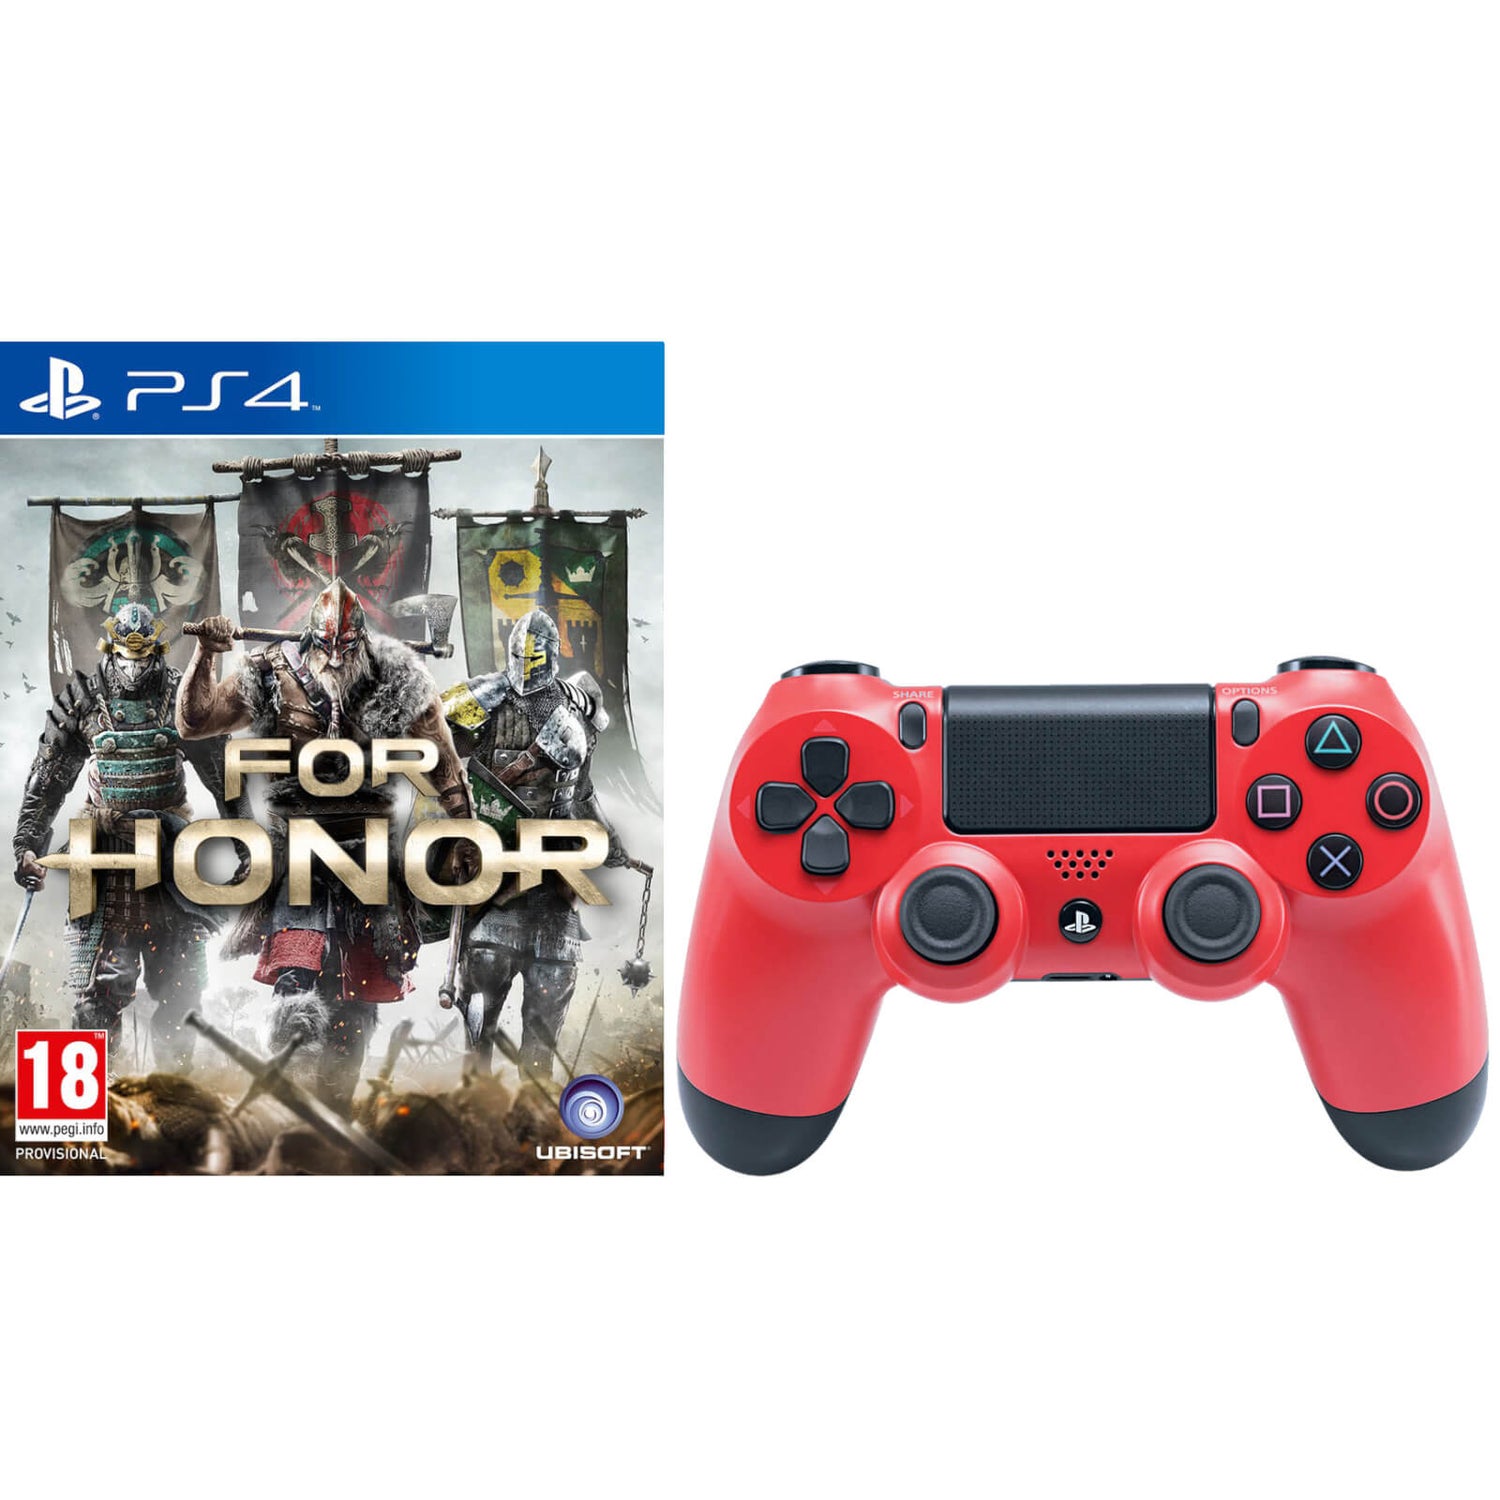 For Honor with Controller US PlayStation Games Zavvi 4 4 Accessories V2 Red - Sony DualShock